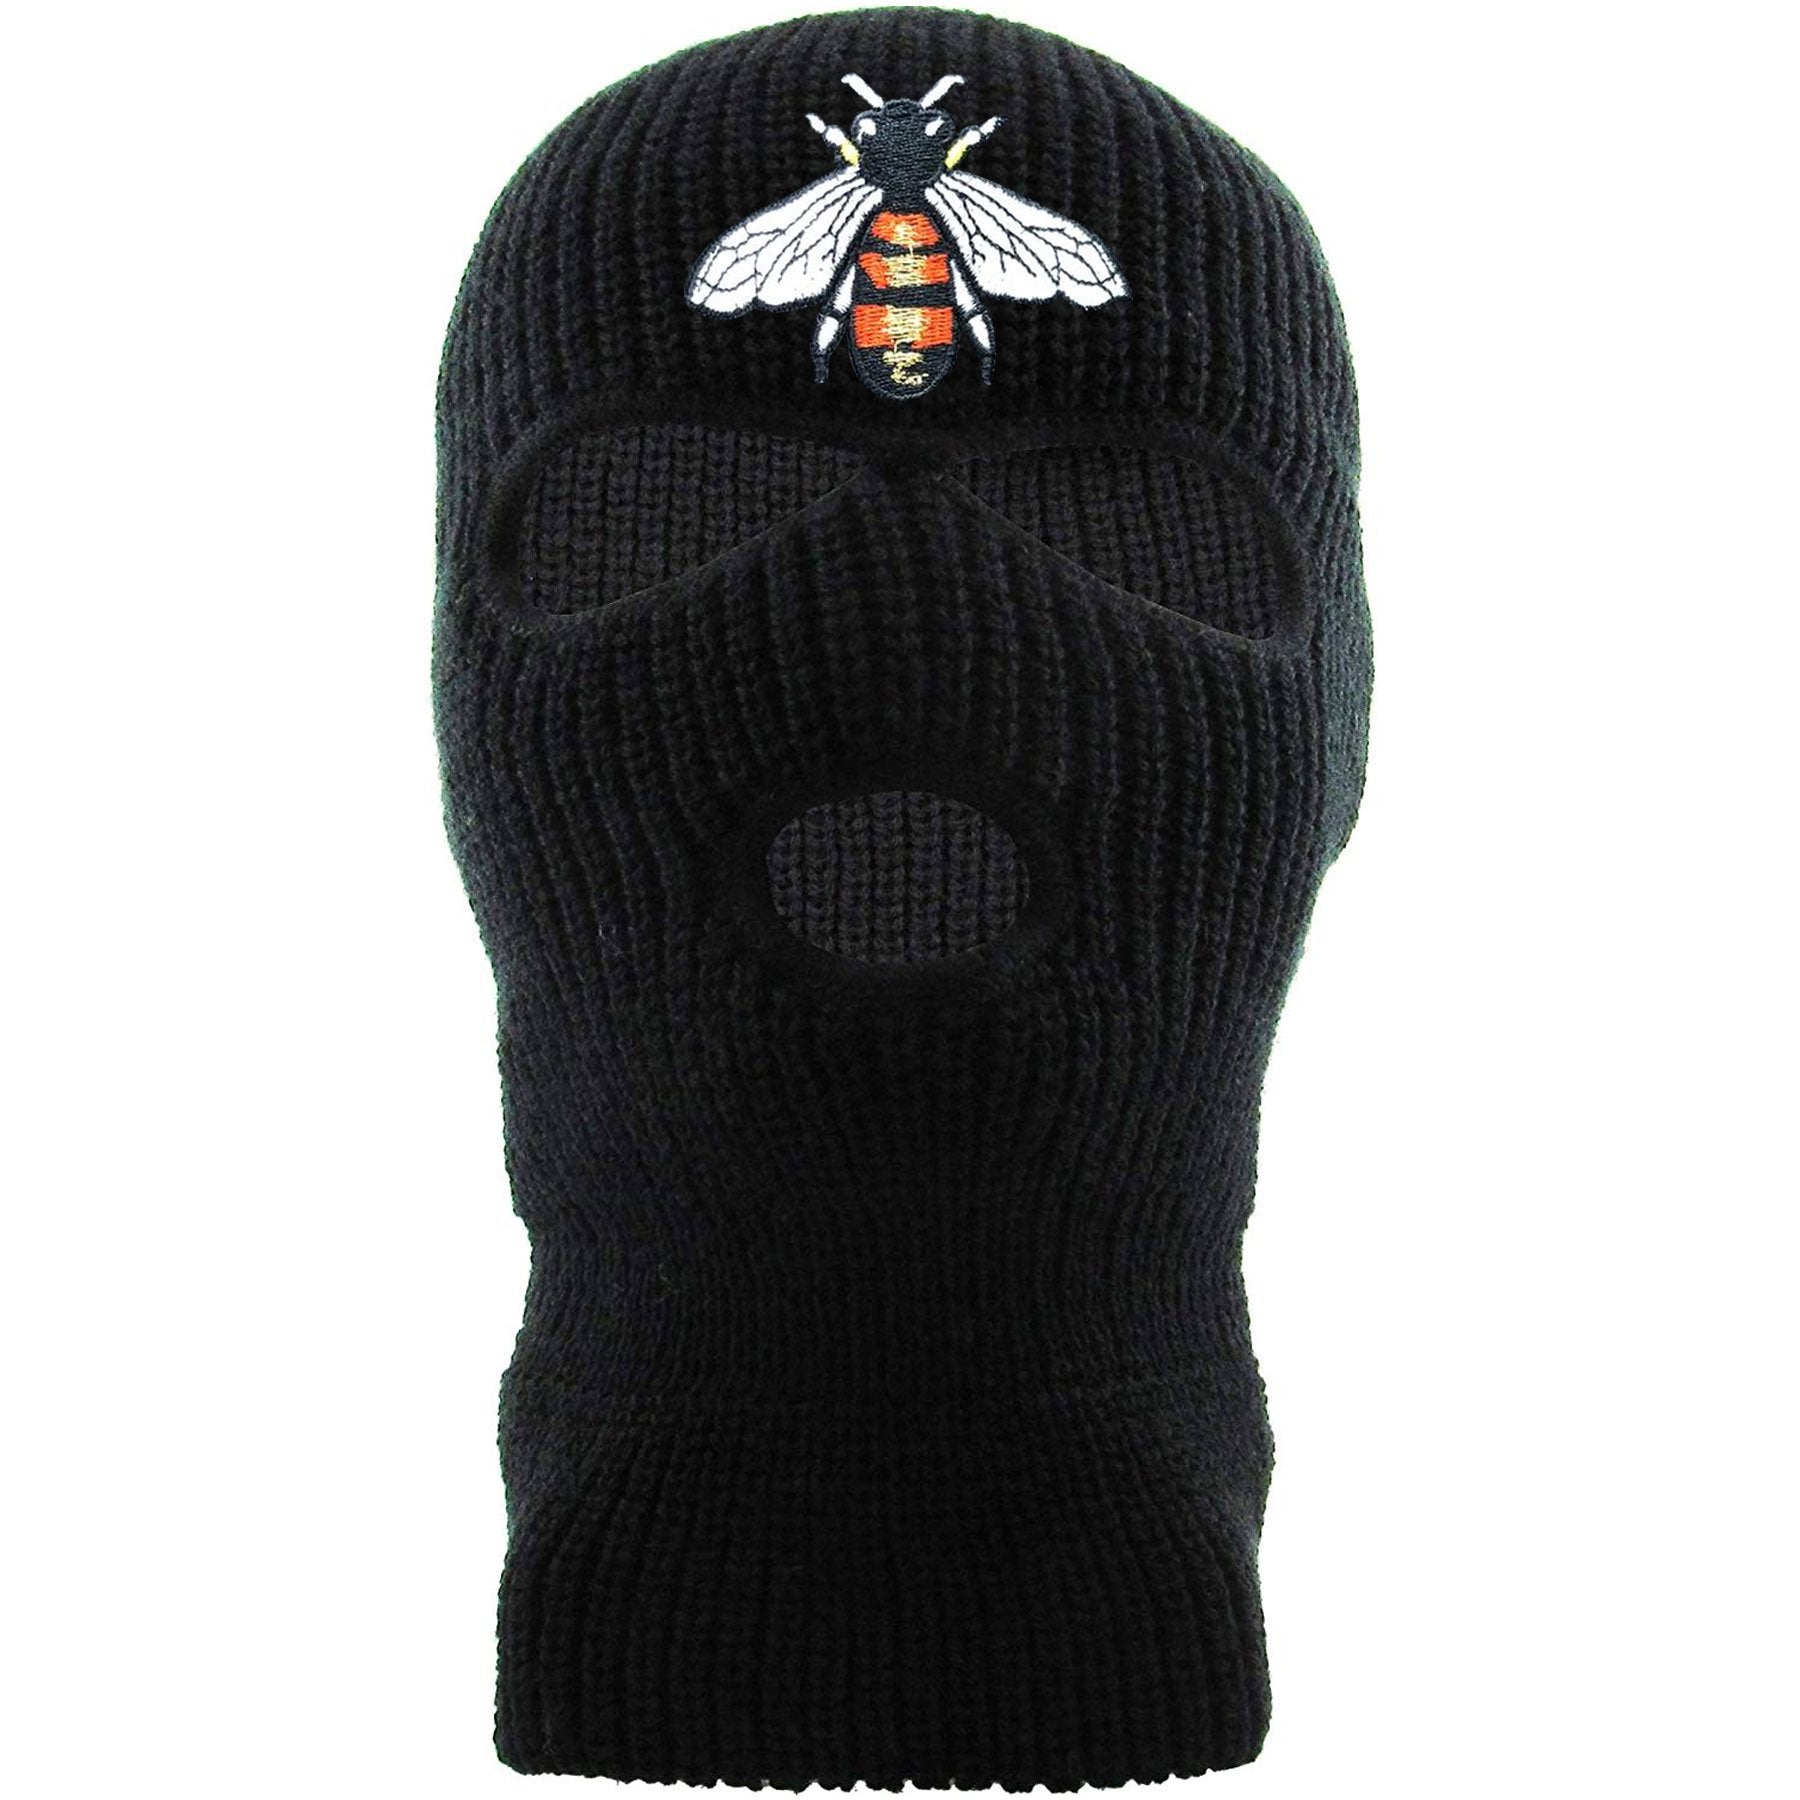 Embroidered on the front of the bumblebee black ski mask is the bumble bee logo embroidered in red, white, black, and gold